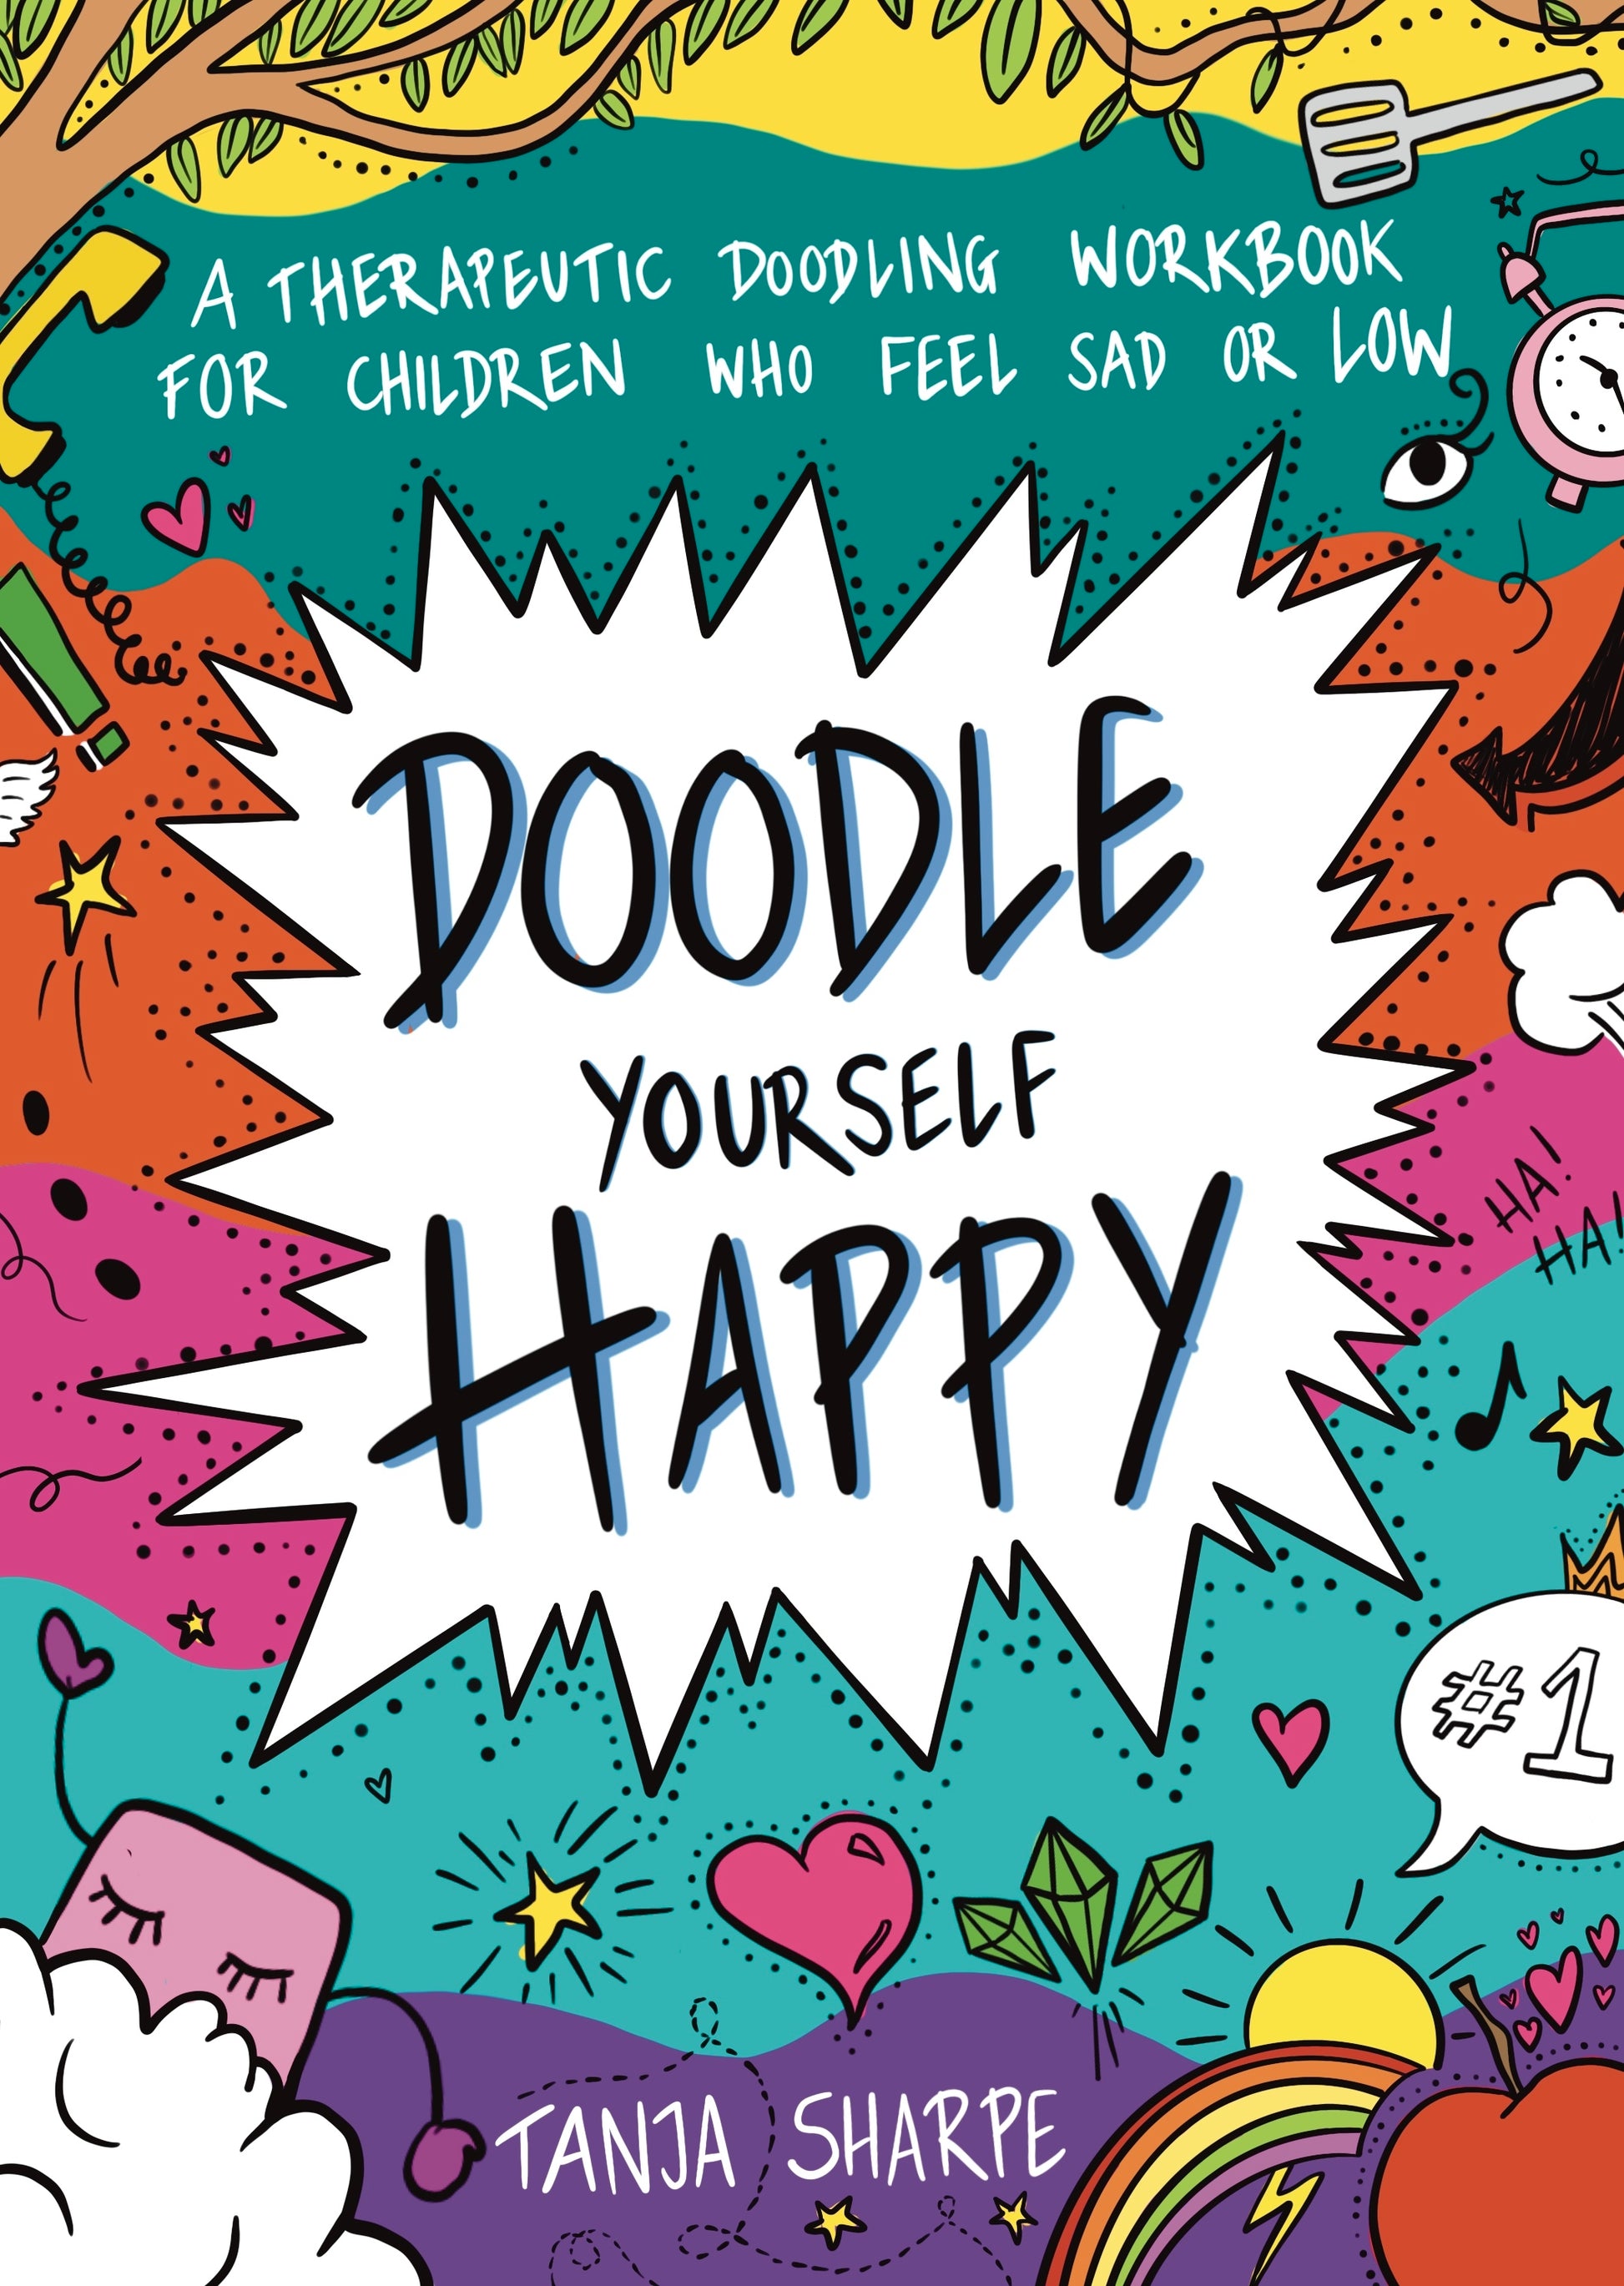 Doodle Yourself Happy by Tanja Sharpe